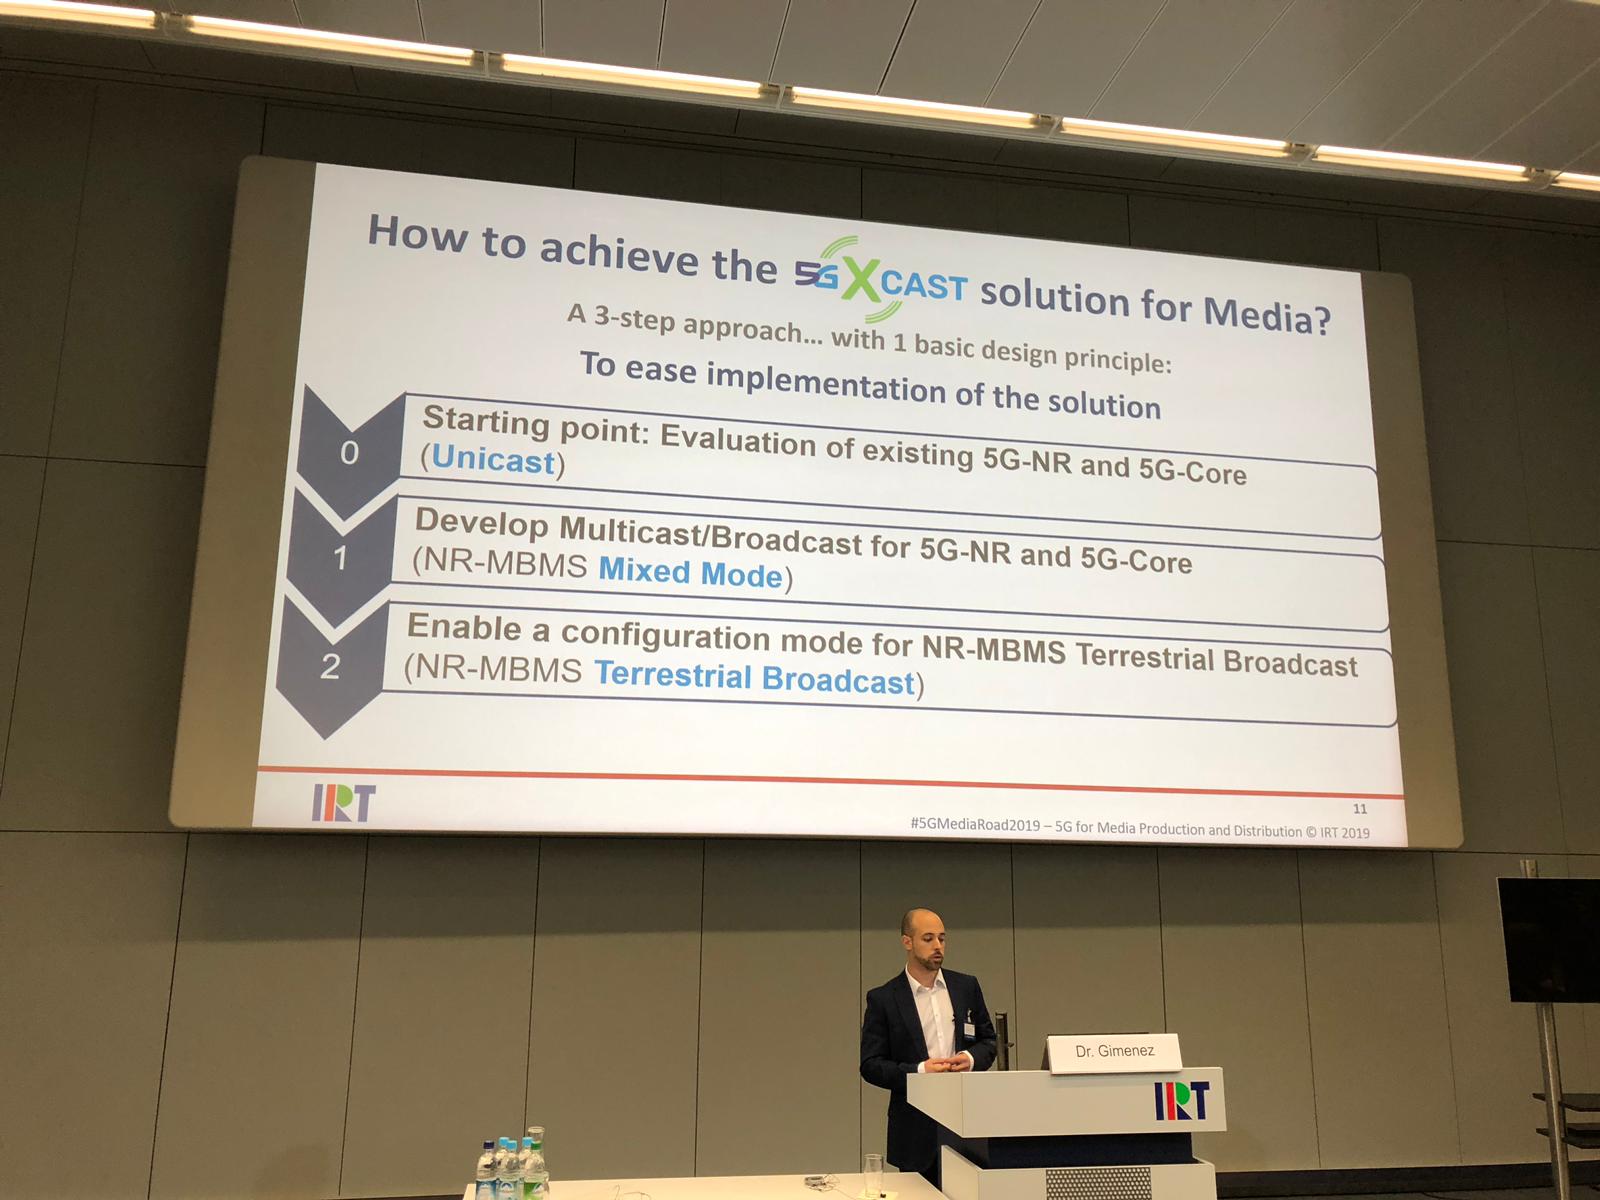 5G-Xcast participation at #5GMediaRoad2019